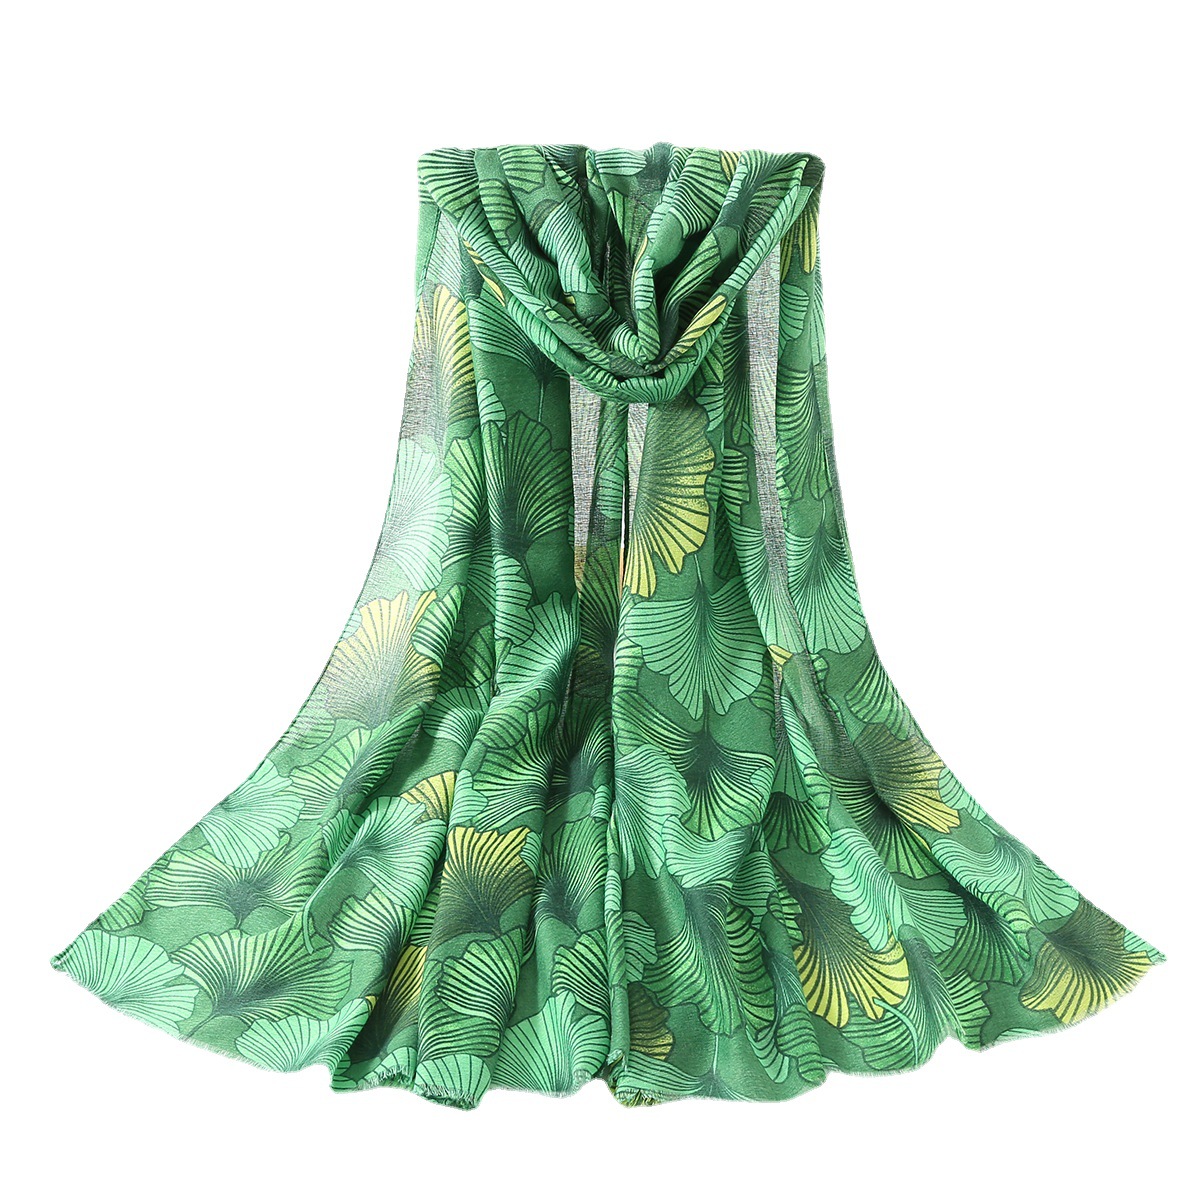 One Piece Dropshipping New Exclusive for Cross-Border Classic Ginkgo Leaf Printed Cotton and Linen Scarf Shawl Factory Wholesale